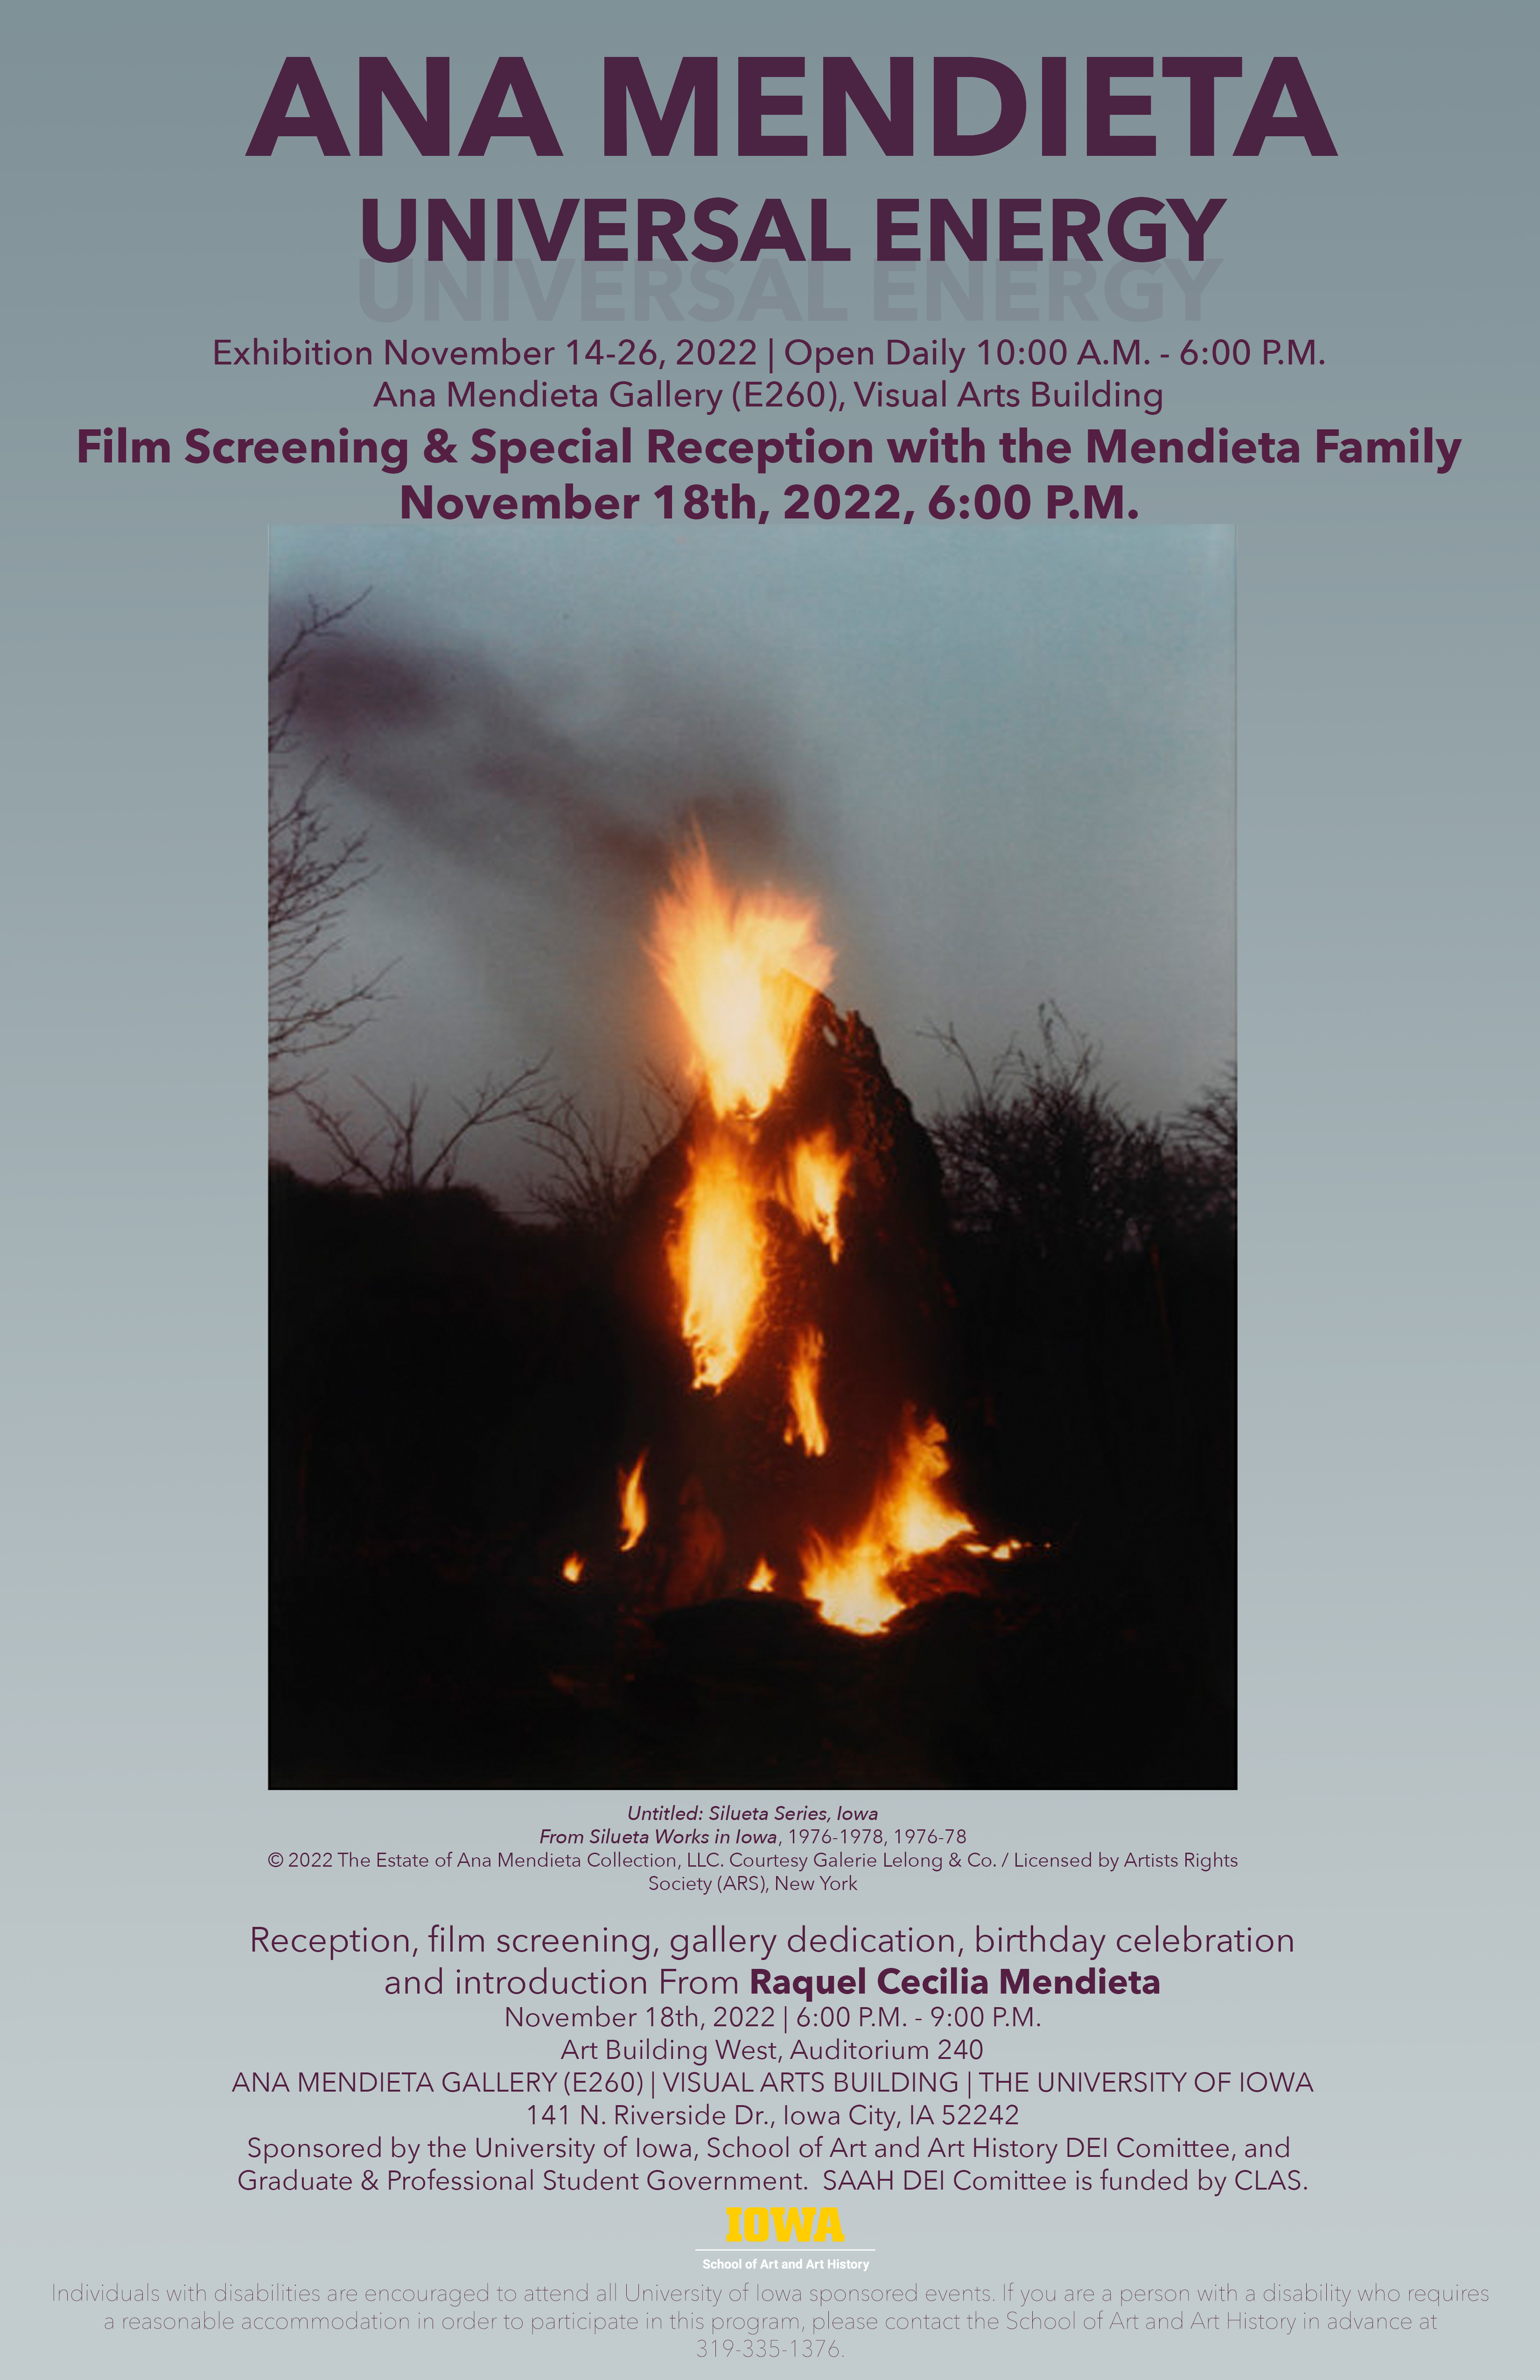 Ana Mendieta Universal Energy Exhibition 11/14/22 to 11/26/22 8:00am-8:00pm Film screening & special Reception with the Mendieta Family November 18,  2022 6:00PM